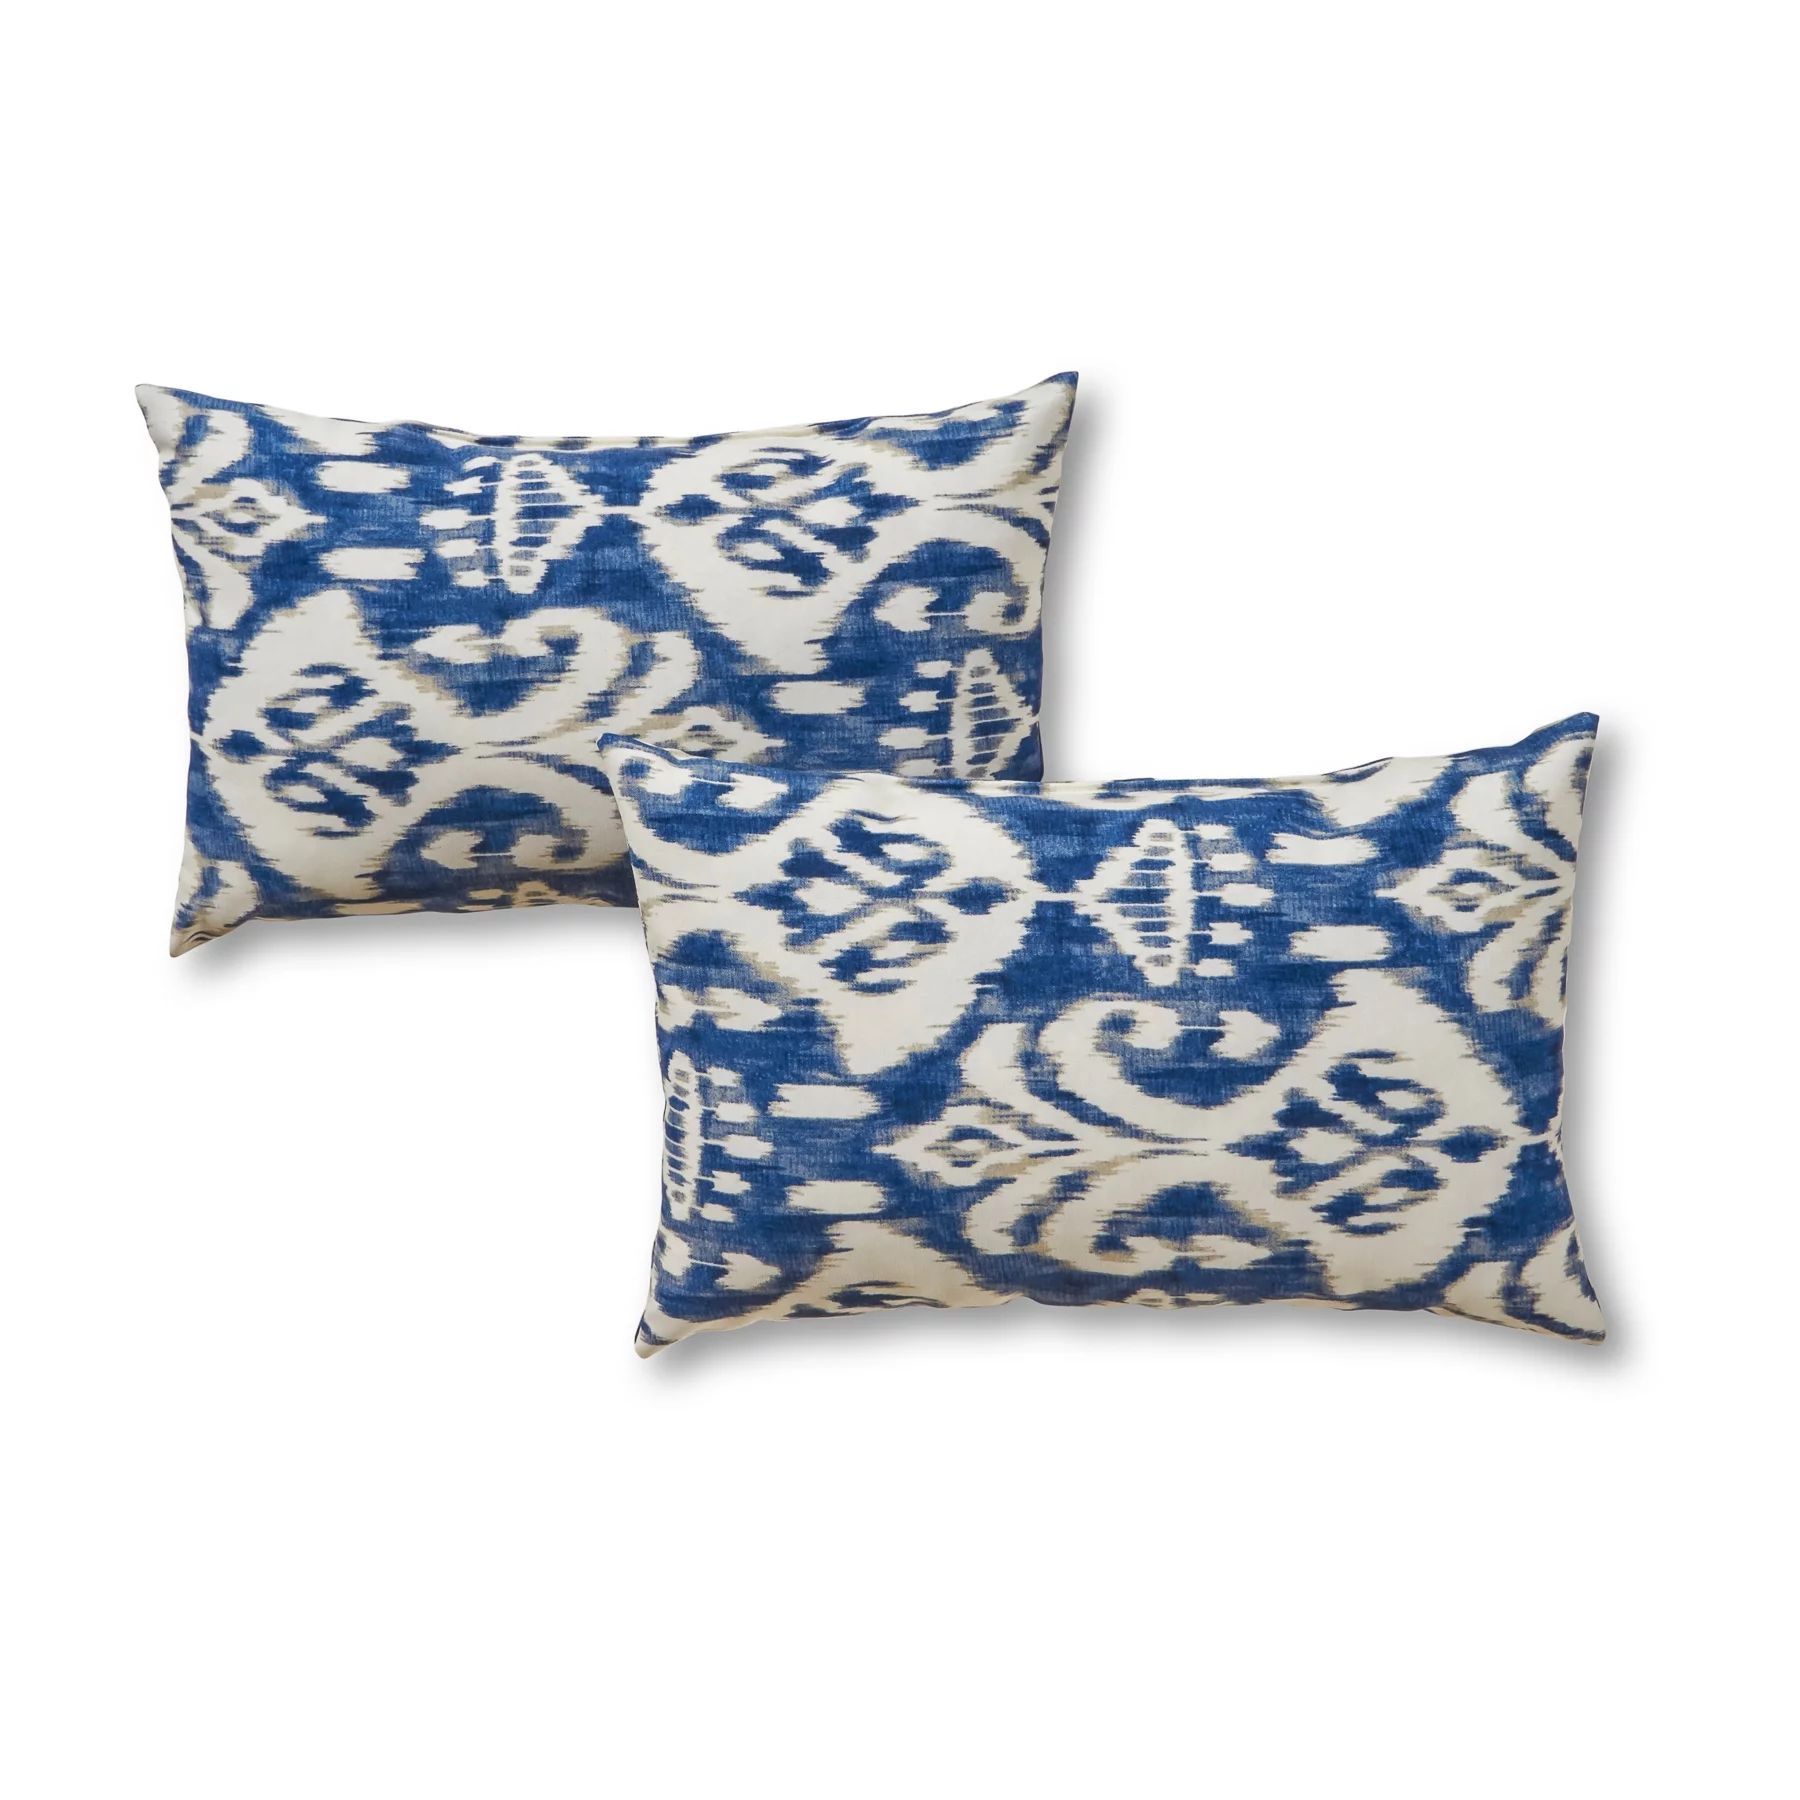 Azule Ikat 19 x 12 in. Outdoor Rectangle Throw Pillow (Set of 2) by Greendale Home Fashions | Walmart (US)